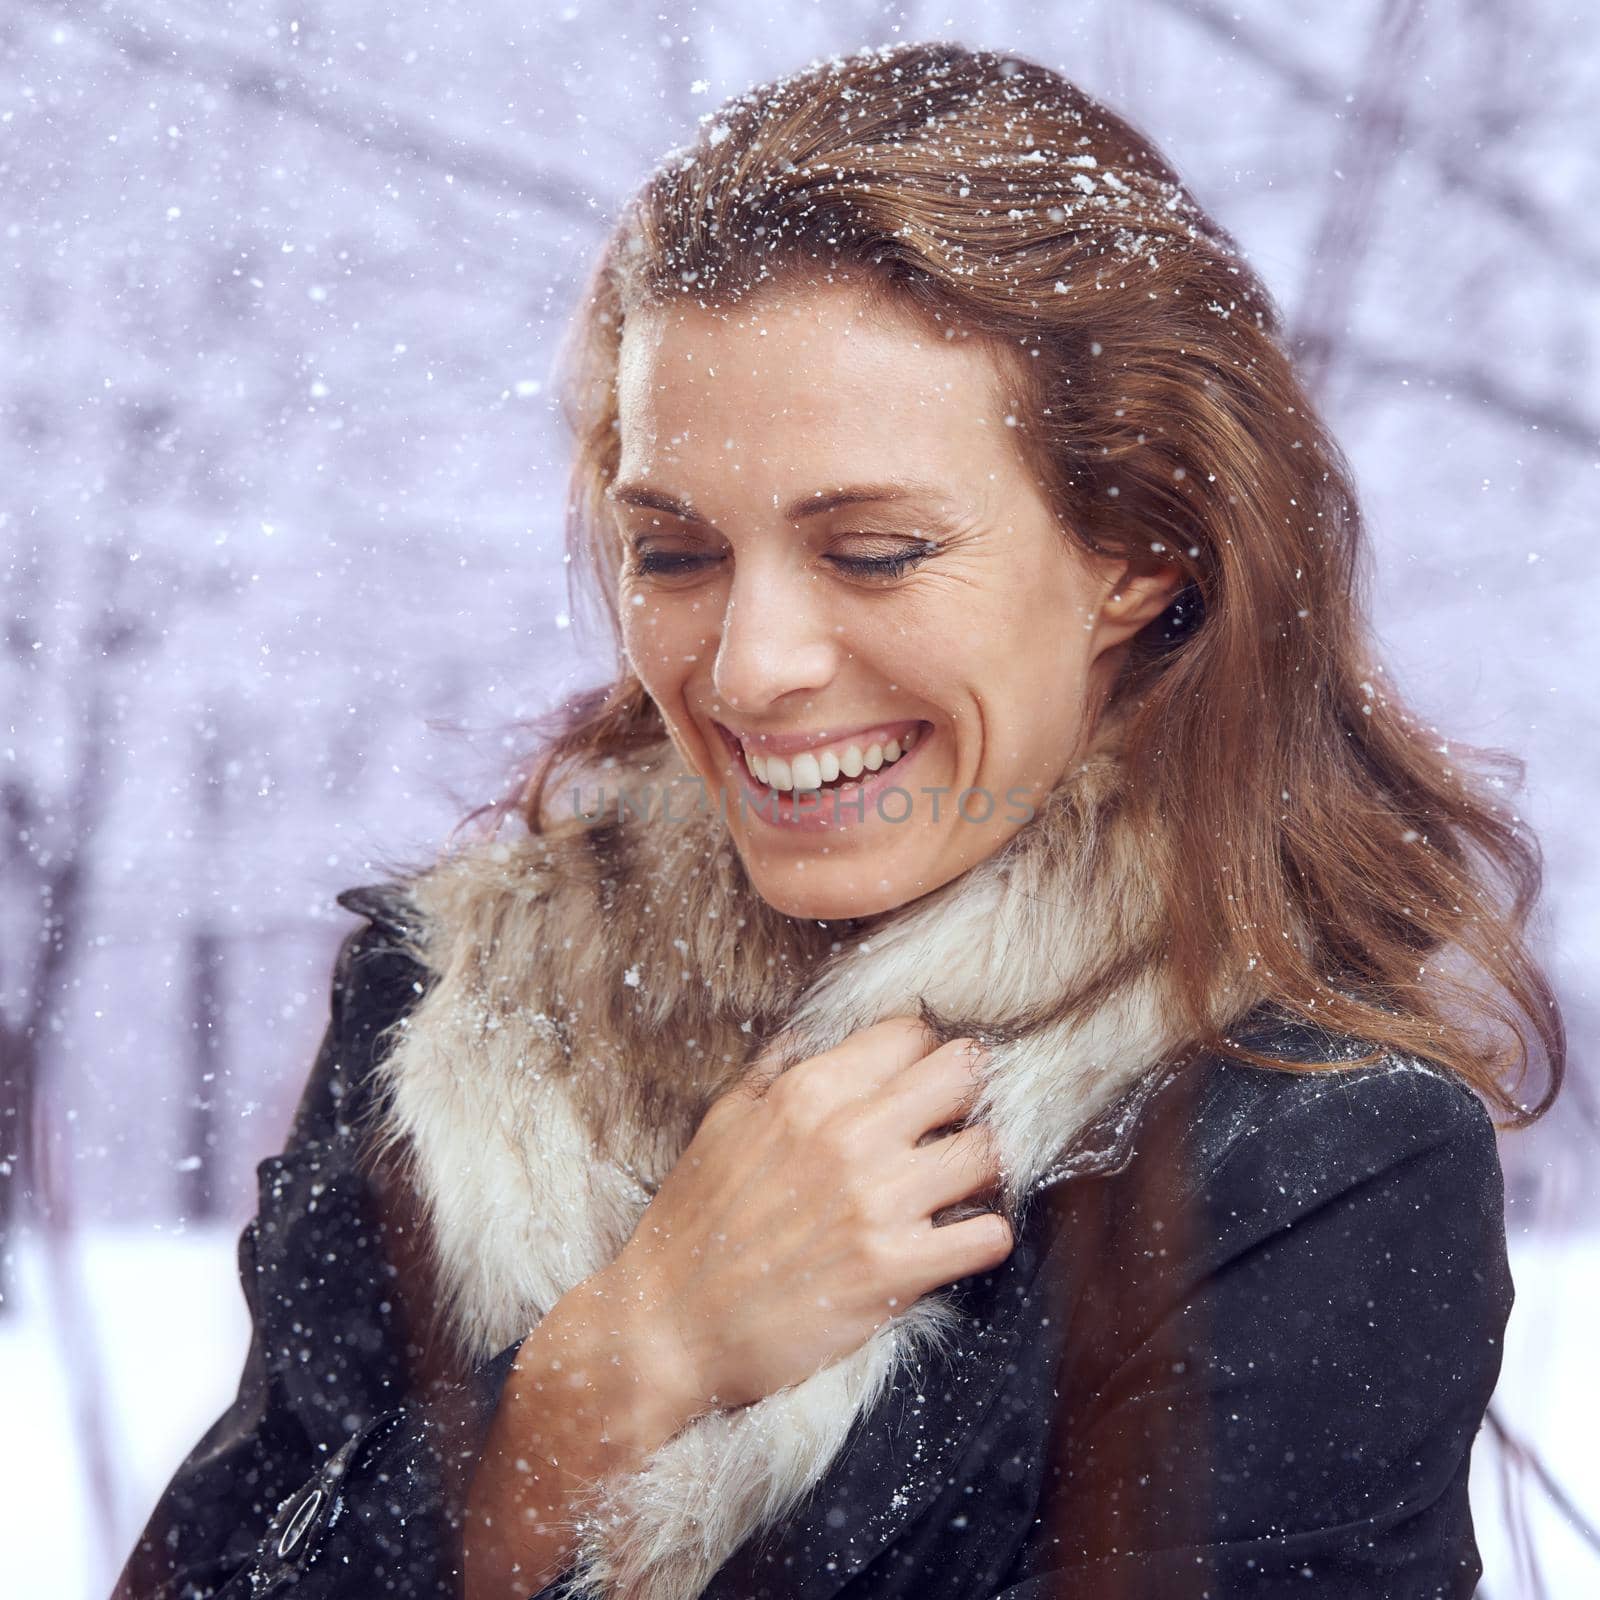 A moment of warmth. Shot of an attractive woman smiling in the snow. by YuriArcurs